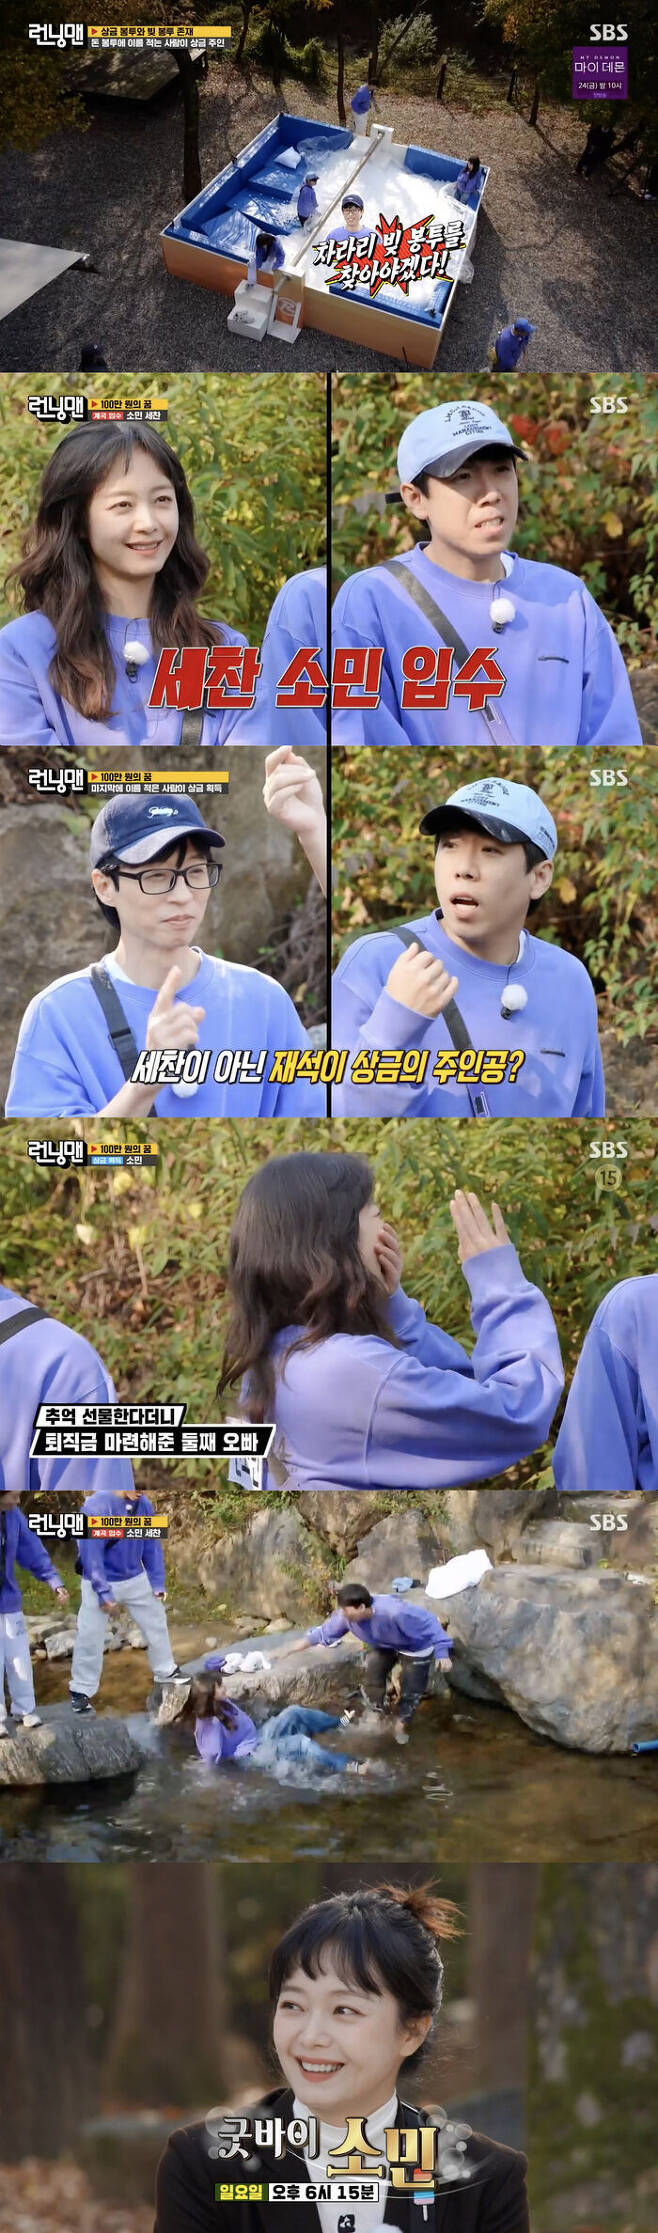 What is the gift that Yoo Jae-Suk gave to Jeon So-min?On SBS Running Man broadcasted on the 5th, Yoo Jae-Suk delivered a special gift to Jeon So-min.On the day of the race, we had to find the prize money Envelope and the debt Envelope and write the name. The person with the name at the end becomes the prize money of 1 million won and the penal character.As a result, members searched for Envelope during the mid-personal time as well as the mission, and as the race progressed, the monopoly stalls surprised everyone with a crazy inflation rate.In the end, members continued to spend without thinking about debt, because at the end, the name should not be used only in debt envelopes.Haha made fun of the members with fake Envelope, but Envelope was harder to find than Envelope.Without fail, Jeon So-min was deceived, and Haha said, This is the taste, and this is the last week.The last mission of the day is to fight pillows side by side.Unlike ordinary pillow fights, Kim Jong-kook had difficulties in the game, which was difficult to balance, and Yoo Jae-suk eventually made a victory for Kim Jong-kook.The members laughed at the crew, asking the crew, The game that can beat Jongguk came out in 13 years.The last time to find Envelope, members did not give up and ransacked everywhere. As a result, Yoo Jae-Suk and Ji Suk-jin searched for debt Envelope.And Yang Se-chan found the prize Envelope and wrote his name and showed satisfaction.Yoo Jae-Suk and Ji Suk-jin wrote Jeon So-min and Yang Se-chan on the debt envelope, respectively, and the youngest motives came to obtain the valley water together.Members who saw this applauded to make memories with friends of the same age, saying, How good is it? Everything is memories. So Min has nothing to do now.Yoo Jae-Suk found Yang Se-chans last hidden envelope, but it wasnt Yoo Jae-Suk.Yoo Jae-suk surprised everyone by writing Jeon So-mins name on the prize Envelope, saying, So Min needs money. I was going to give it to him even if I could, worried about Jeon So-min, who will disjoint next week.On the other hand, at the end of the broadcast, the members who prepared a special trip for Jeon So-min, who was the last broadcast of the next week, trailered and wondered.